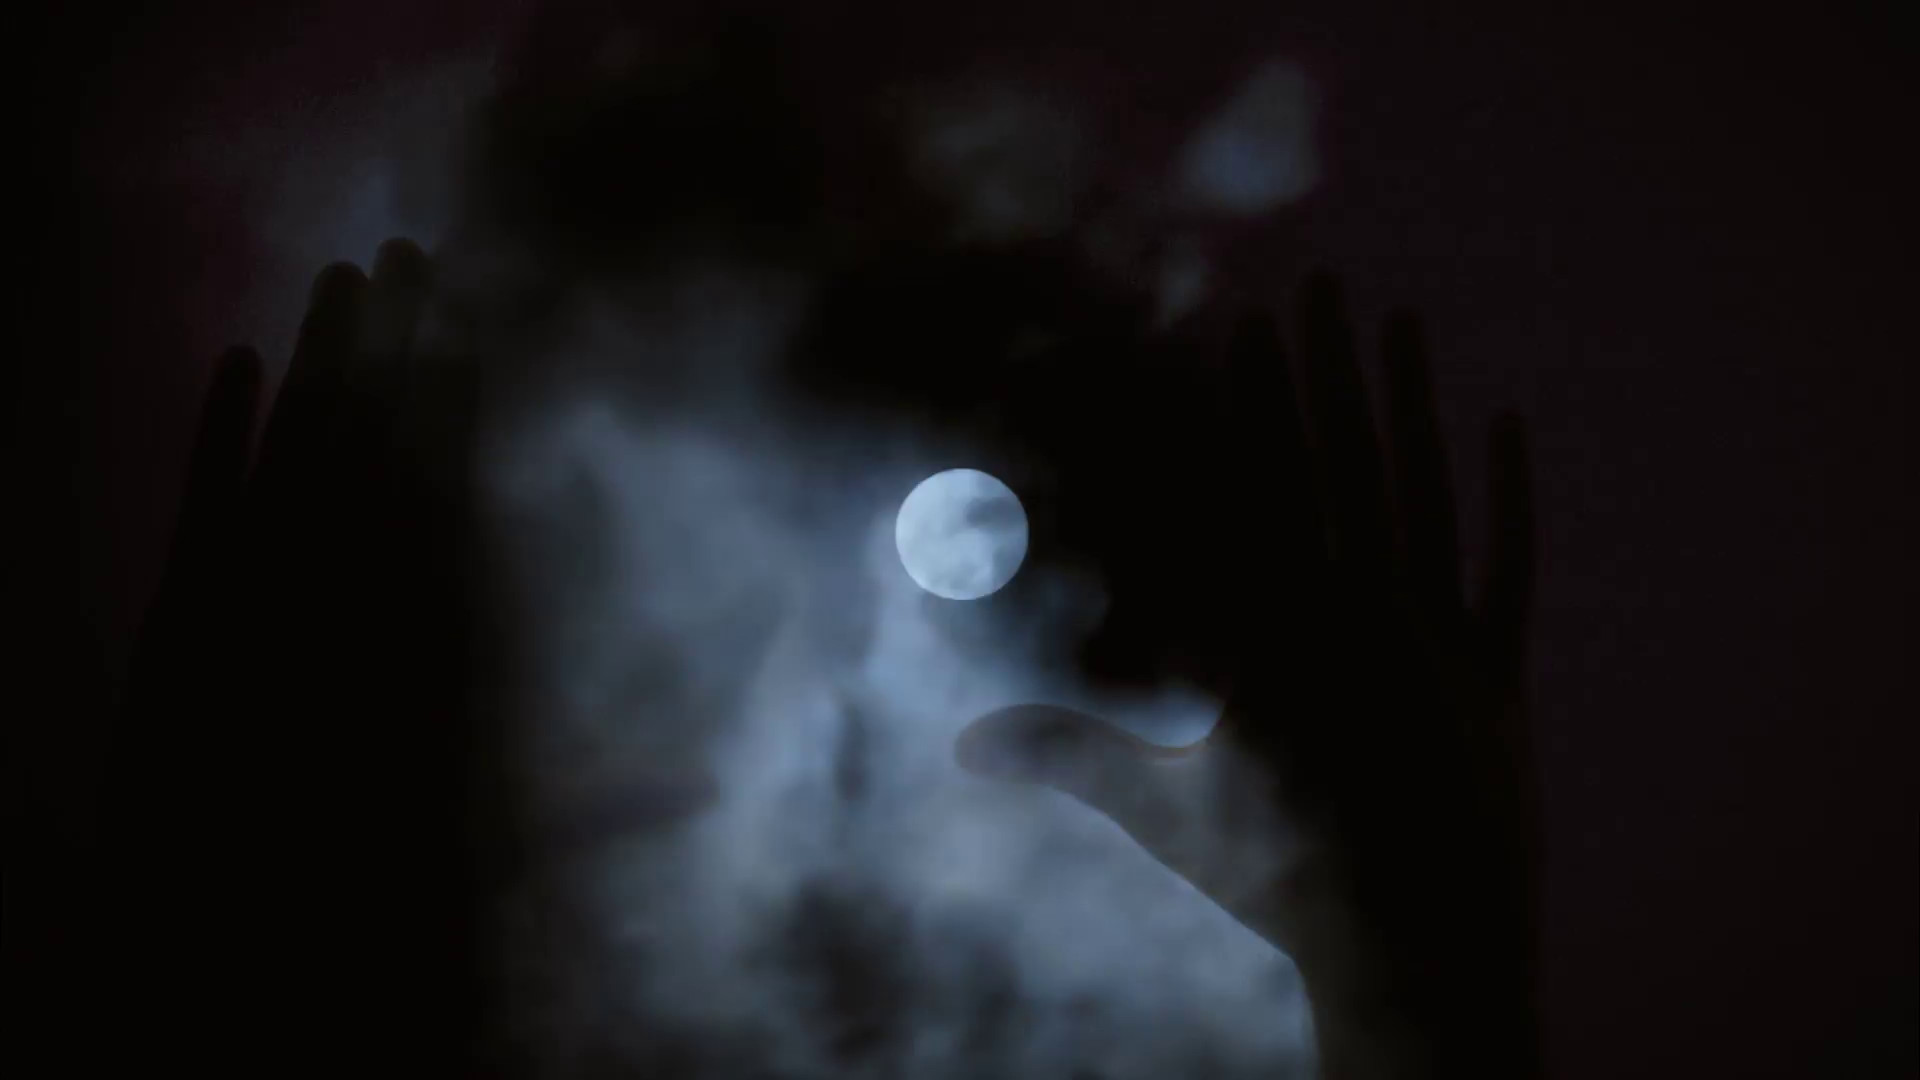 1920x1080 Full moon hands silhouette. Hands and faces of people appearing like ghosts  or silhouettes on